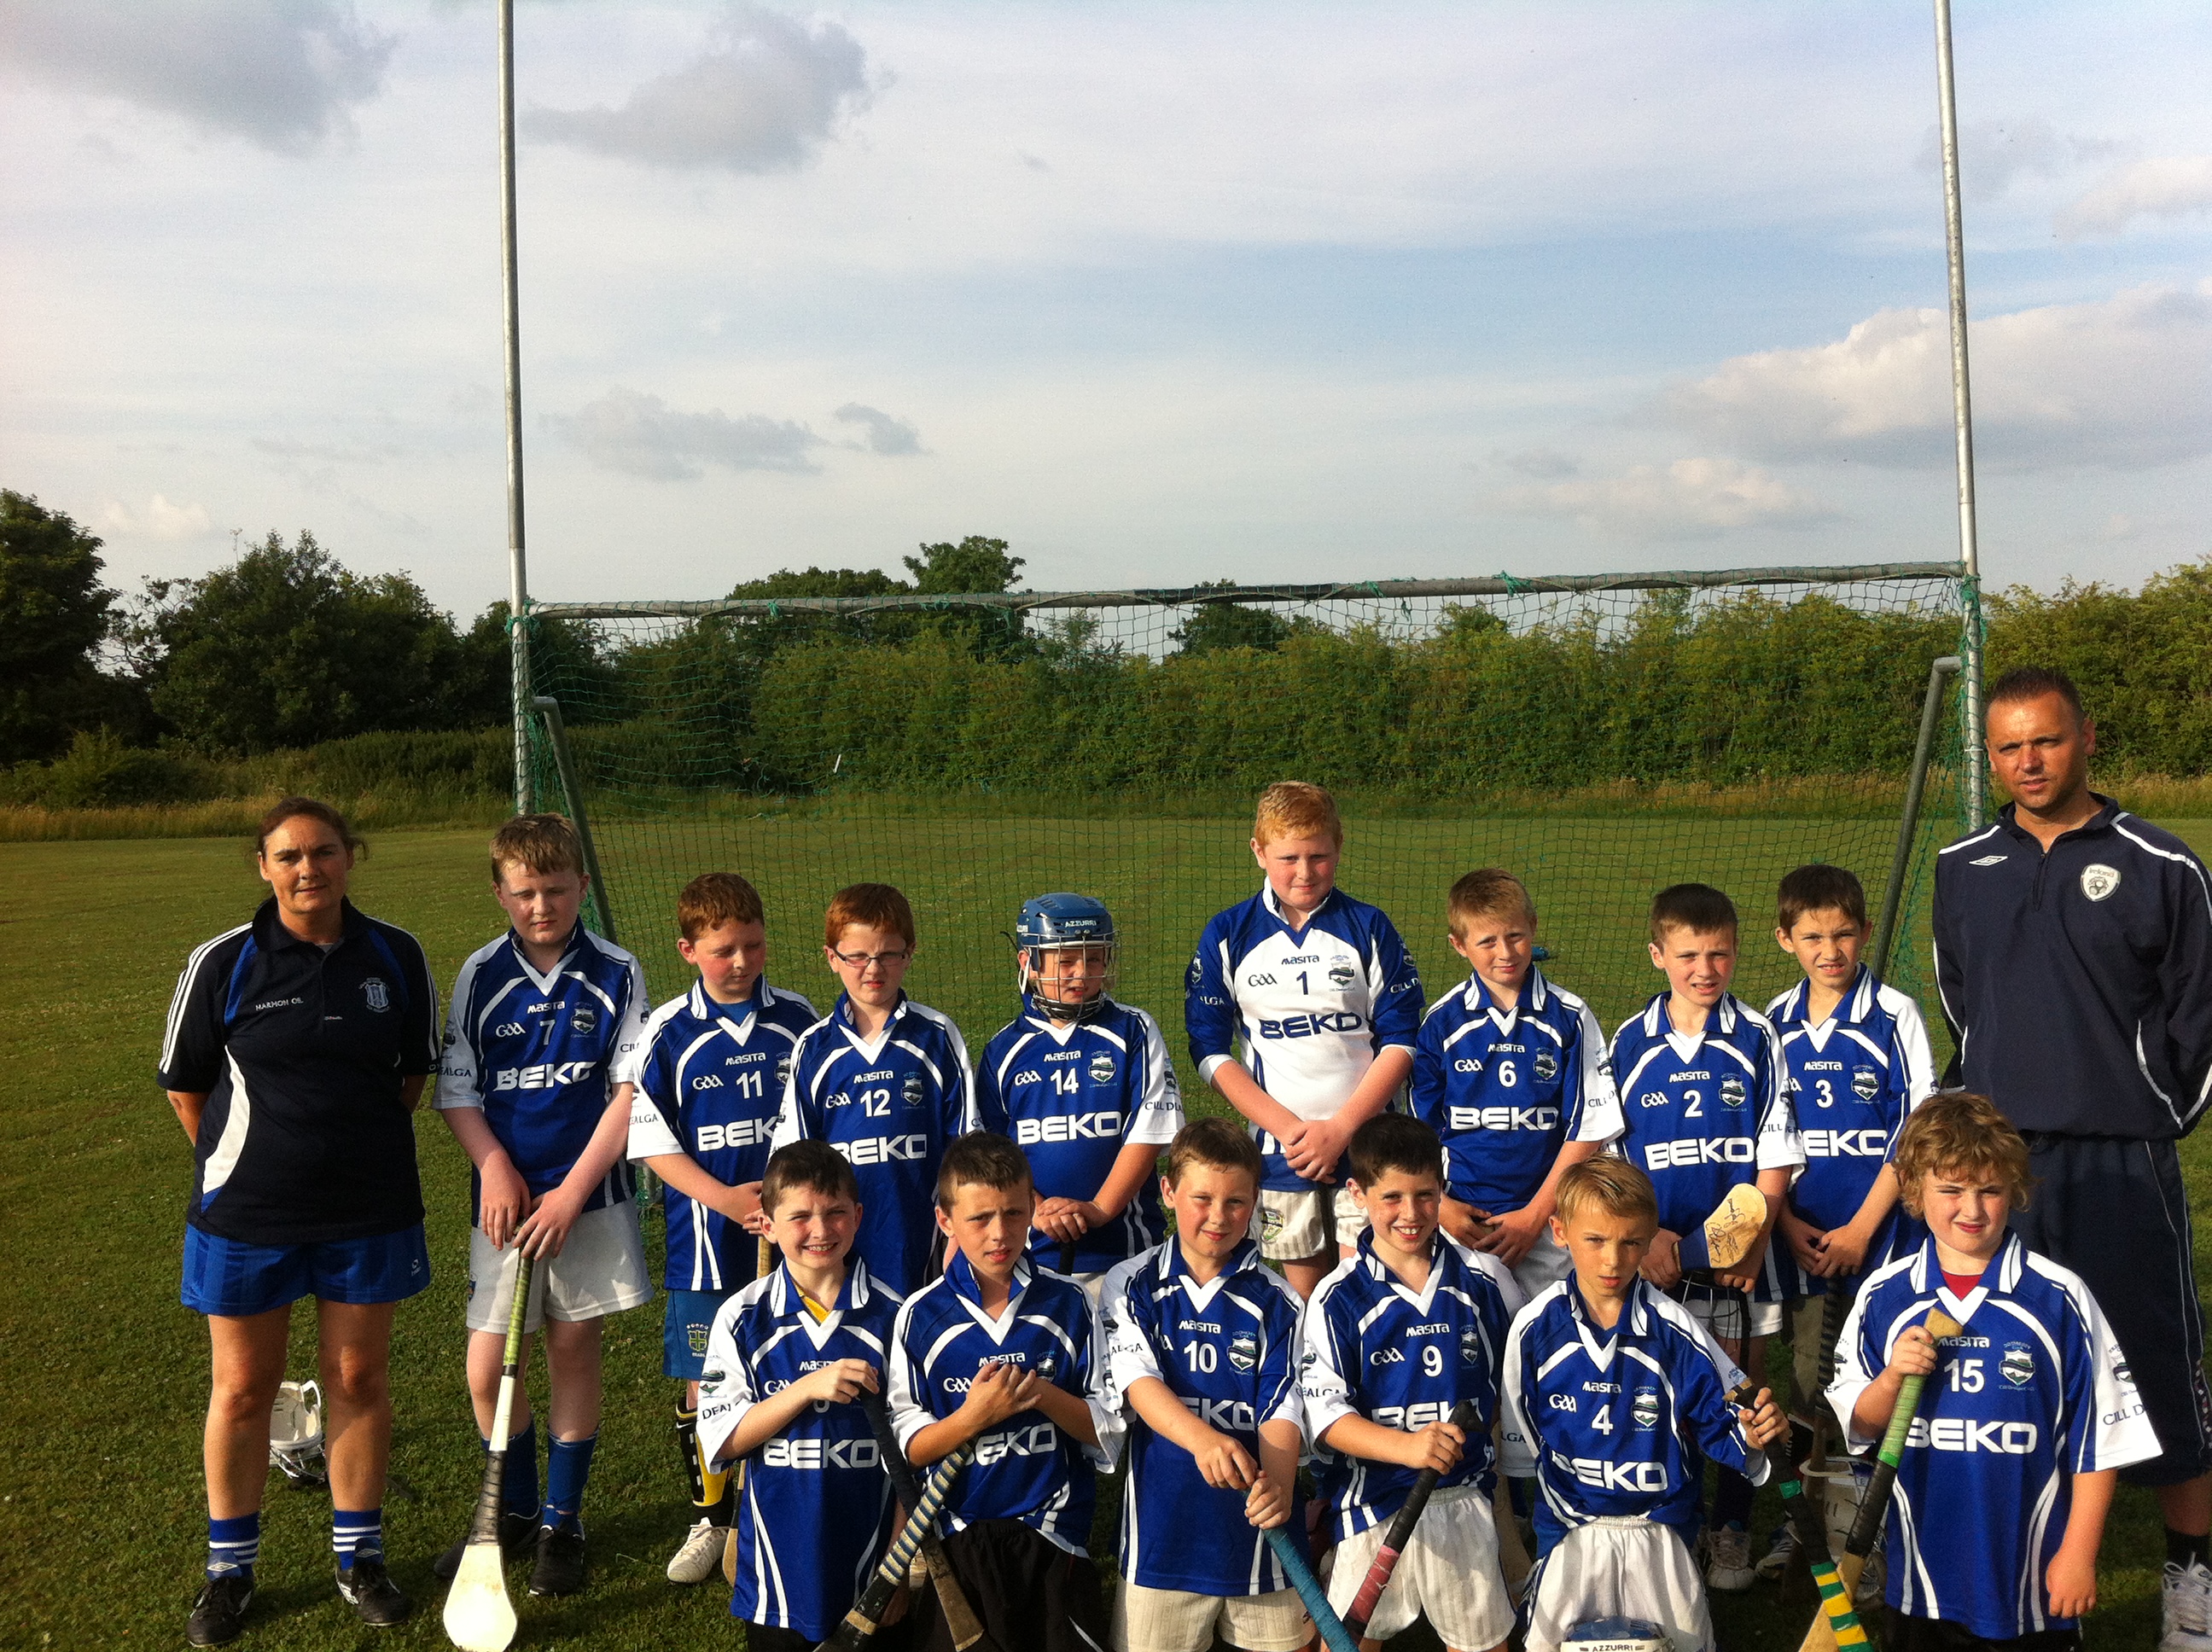 U14's in their new kit